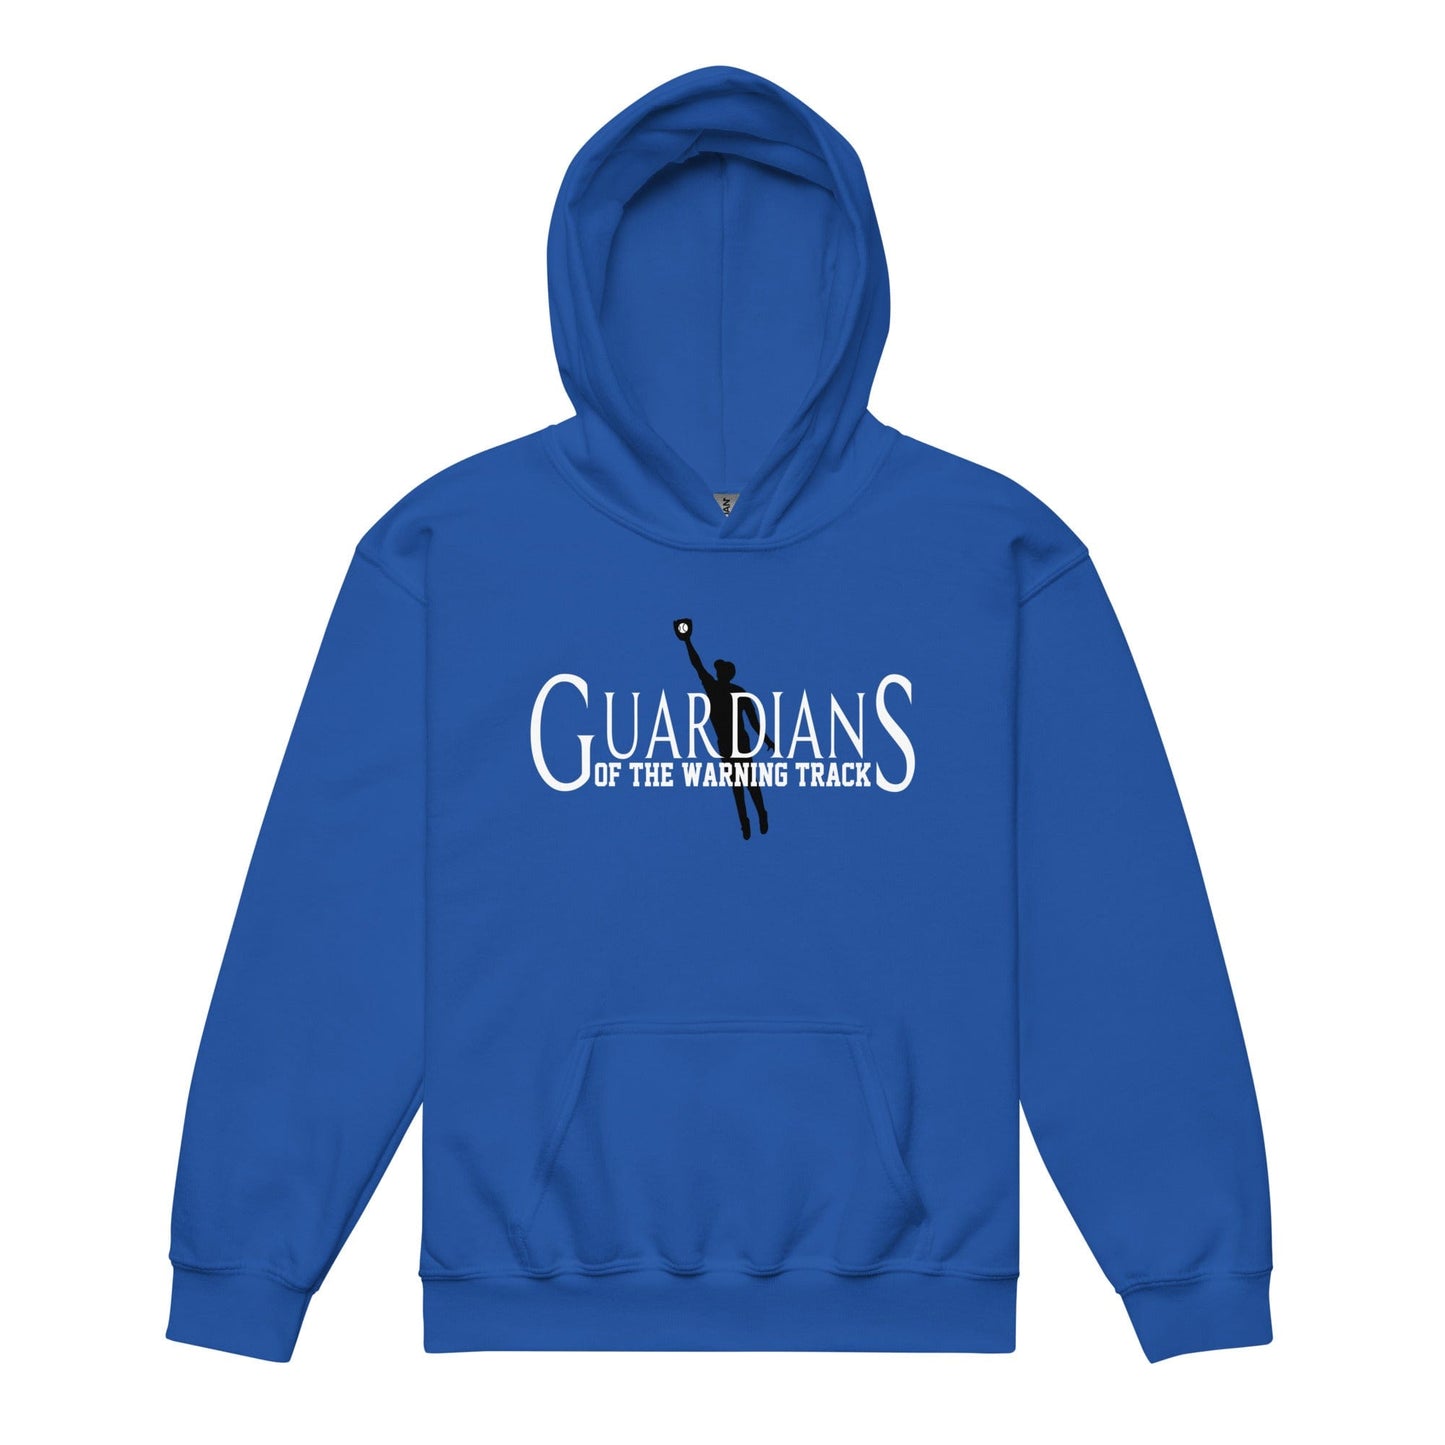 Guardians Of The Warning Track - Youth Hoodie